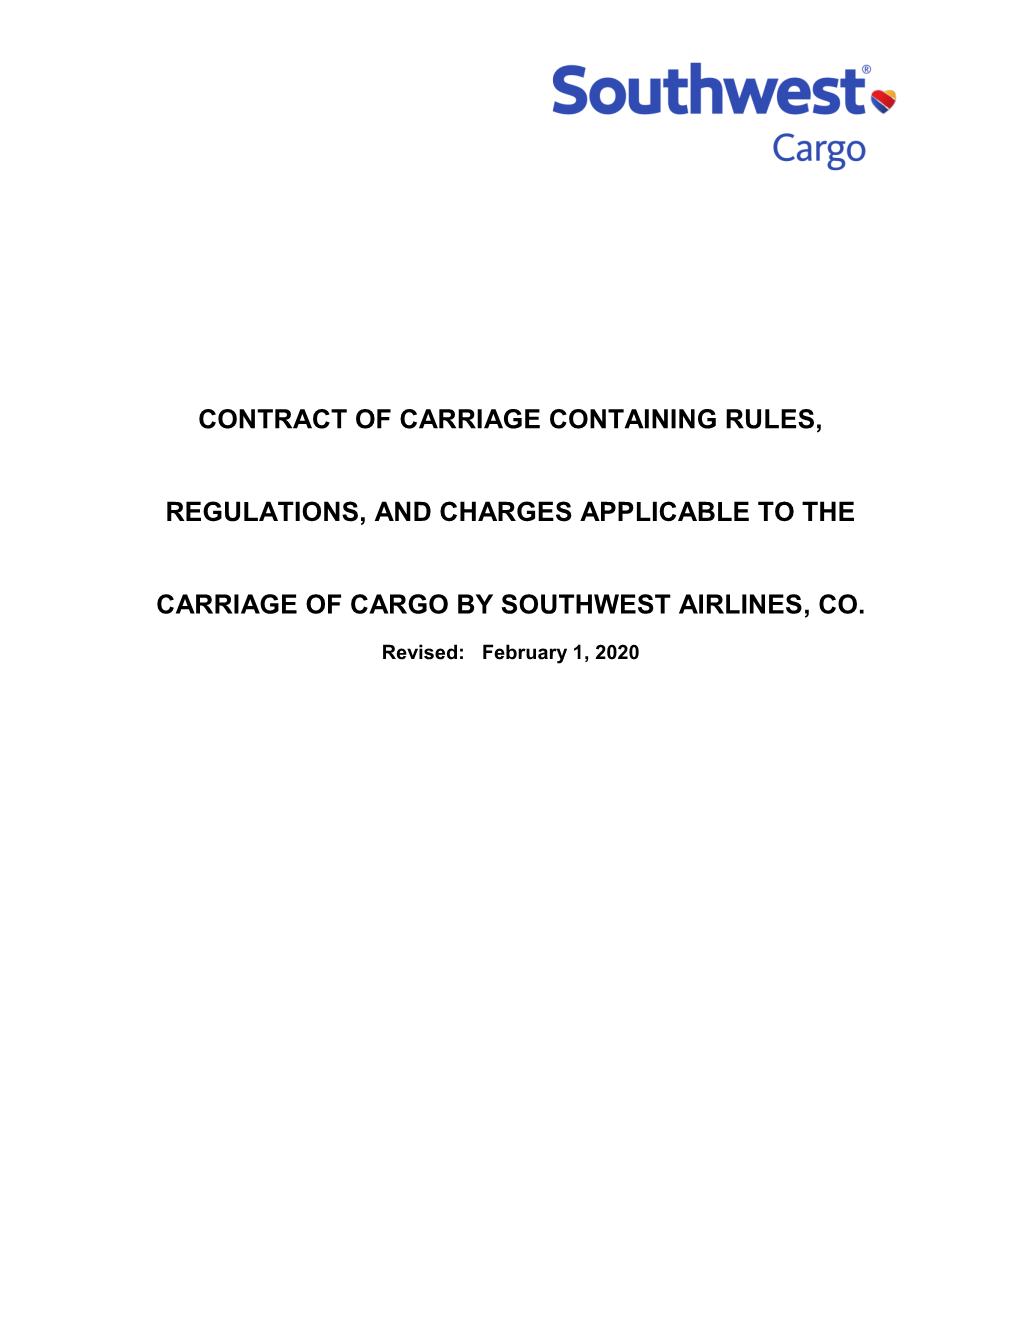 Contract of Carriage Containing Rules, Regulations, and Charges Applicable to the Carriage of Cargo by Southwest Airlines Co